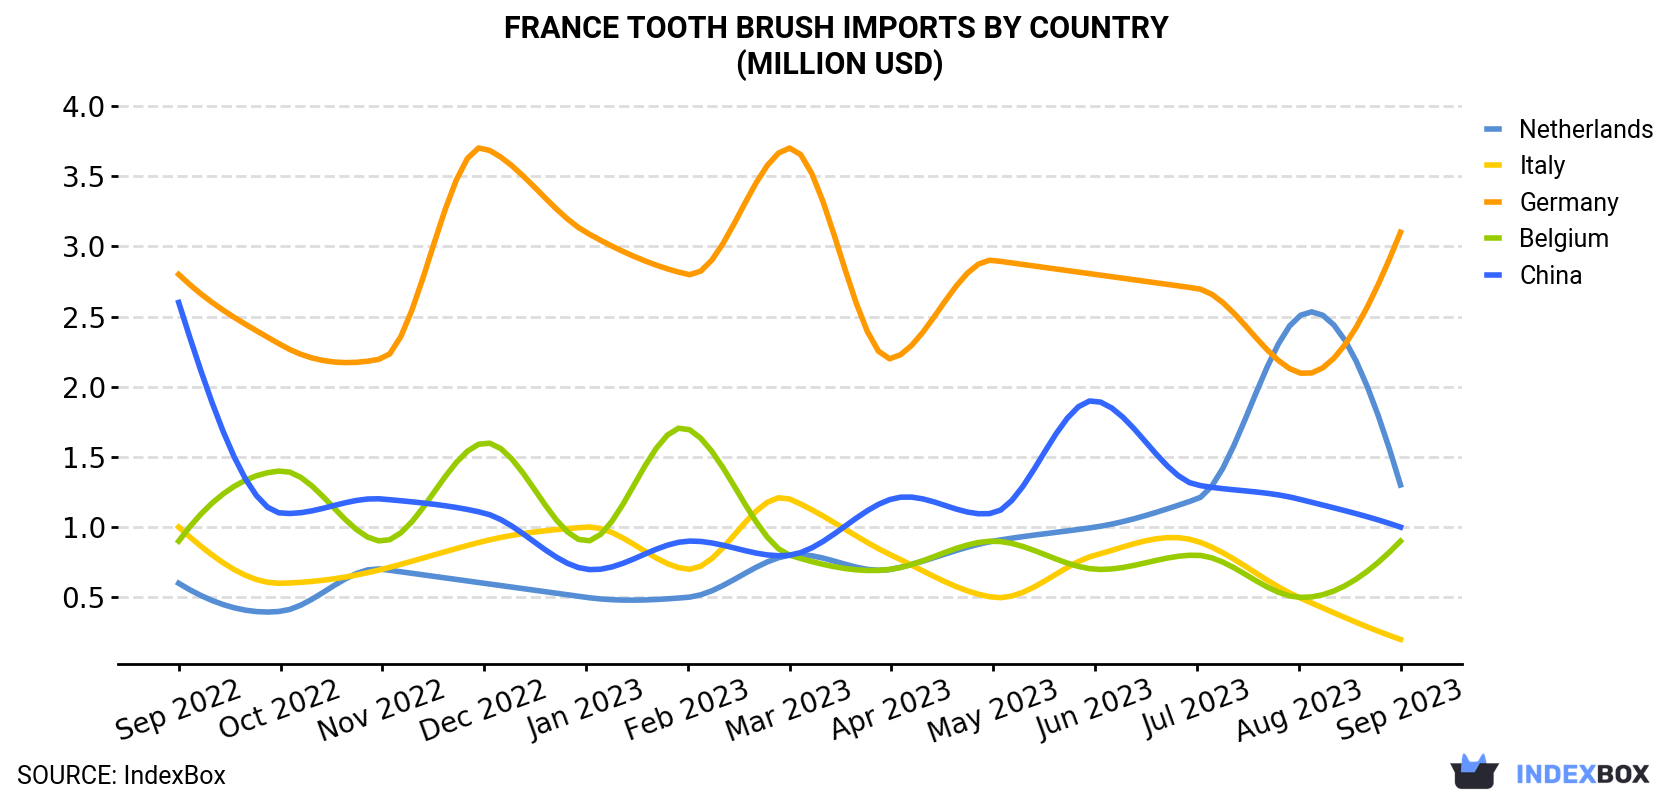 France Tooth Brush Imports By Country (Million USD)